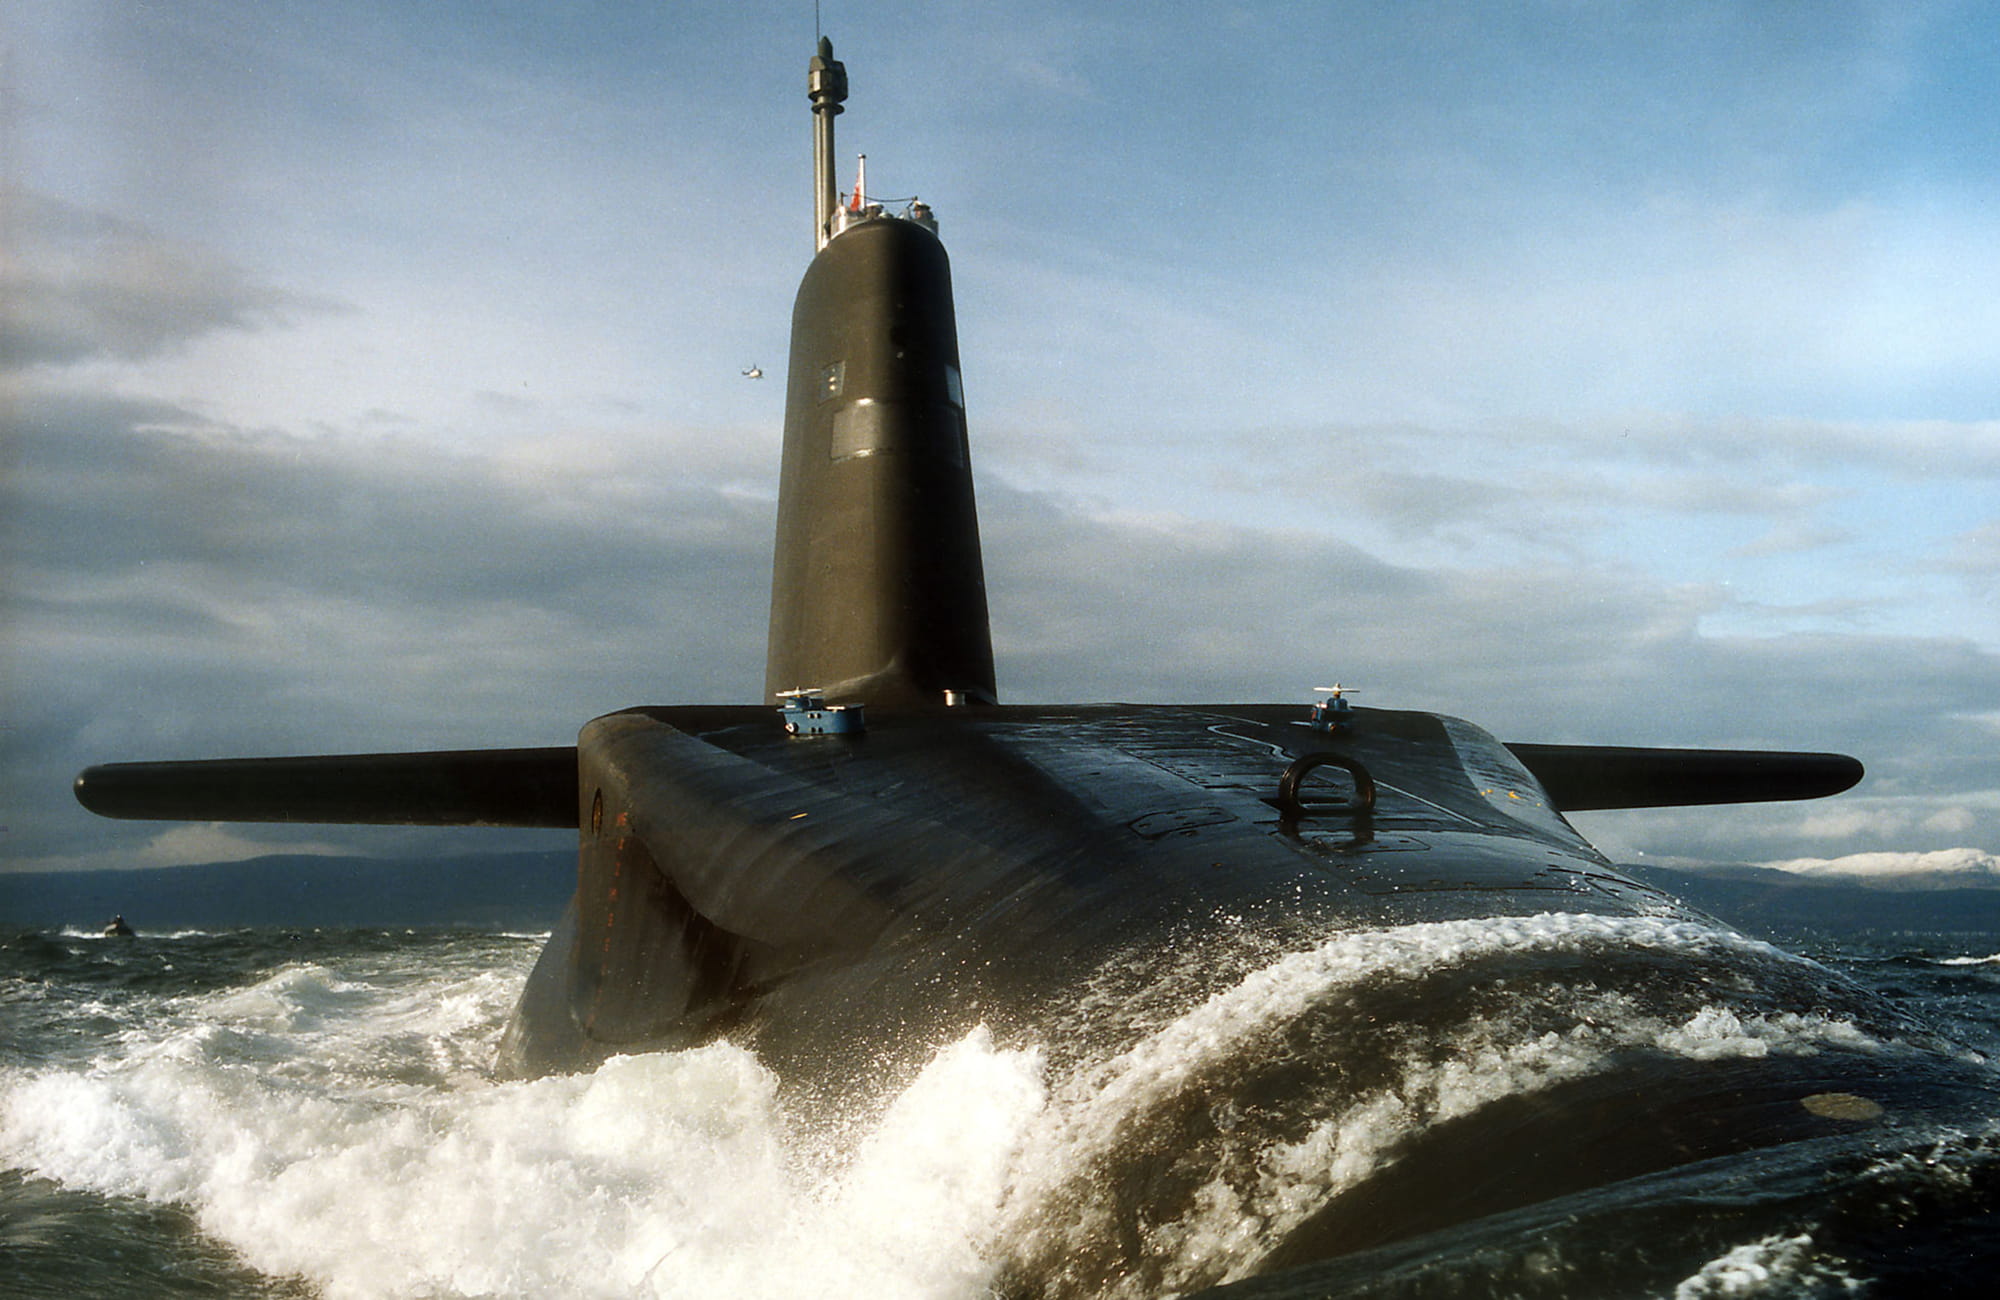 Massive Trident submarine surfaces with water pouring over its surface